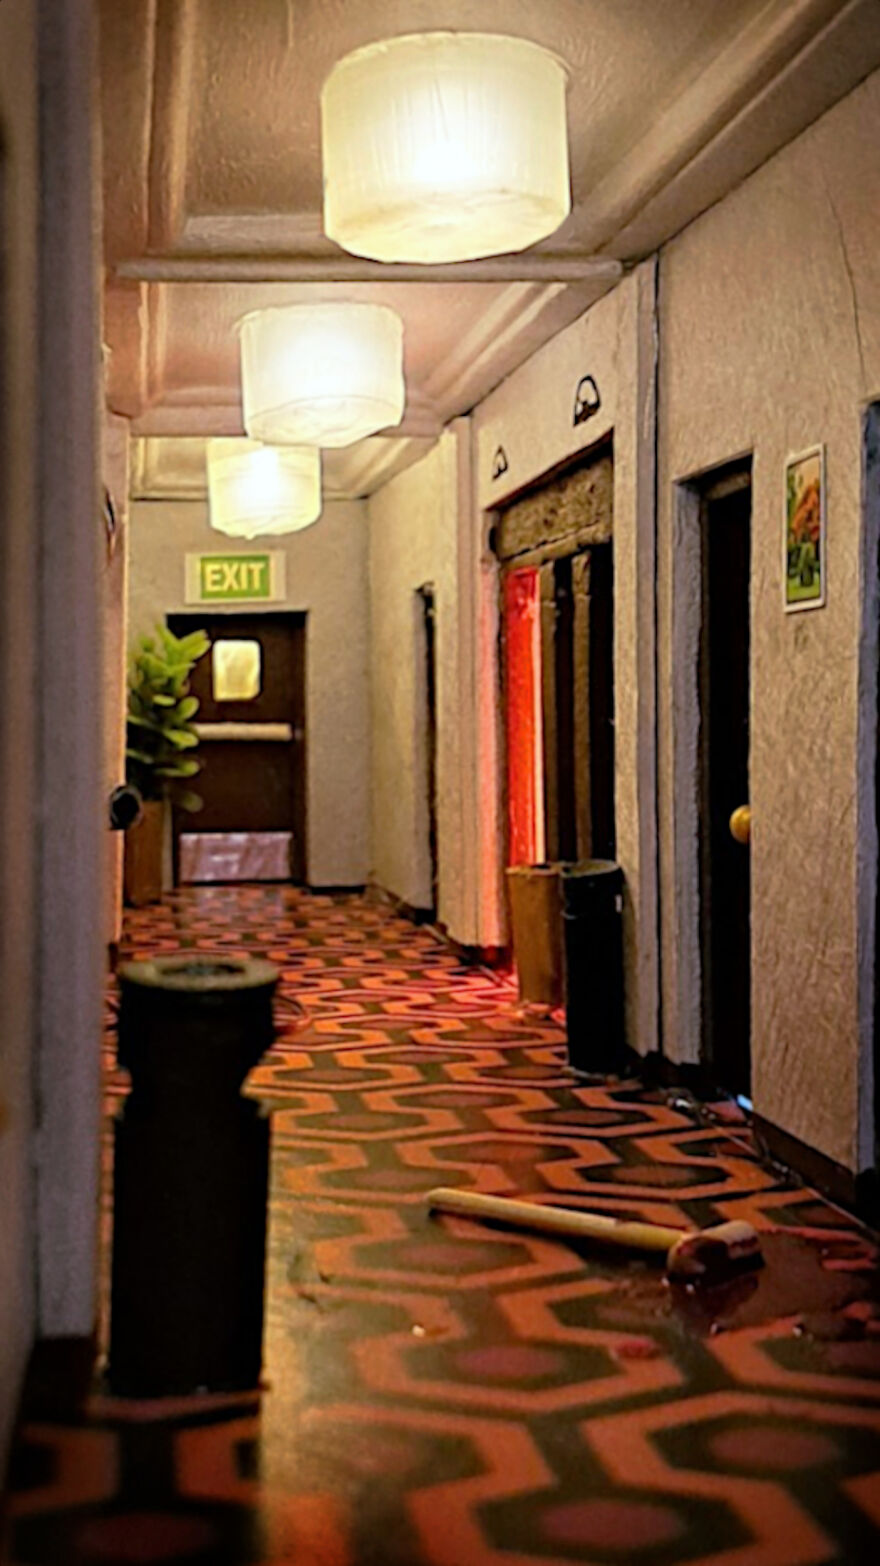 I Recreated The Famous Hallway Out Of Stephen King's "The Shining" As A Book Nook